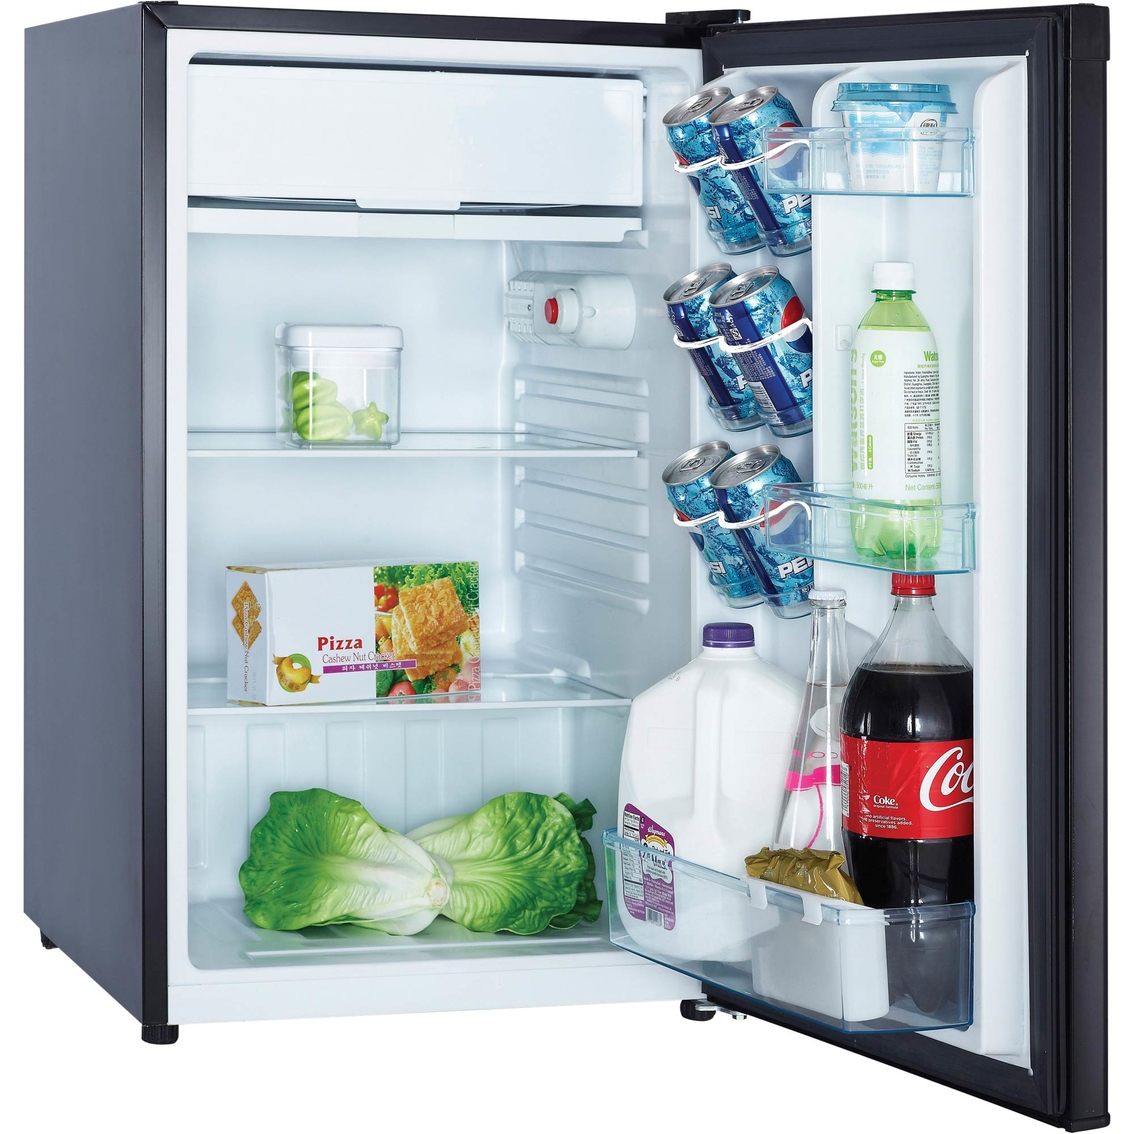 Avanti 4.4 cu. ft. Compact Refrigerator with Chiller Compartment - Image 2 of 2